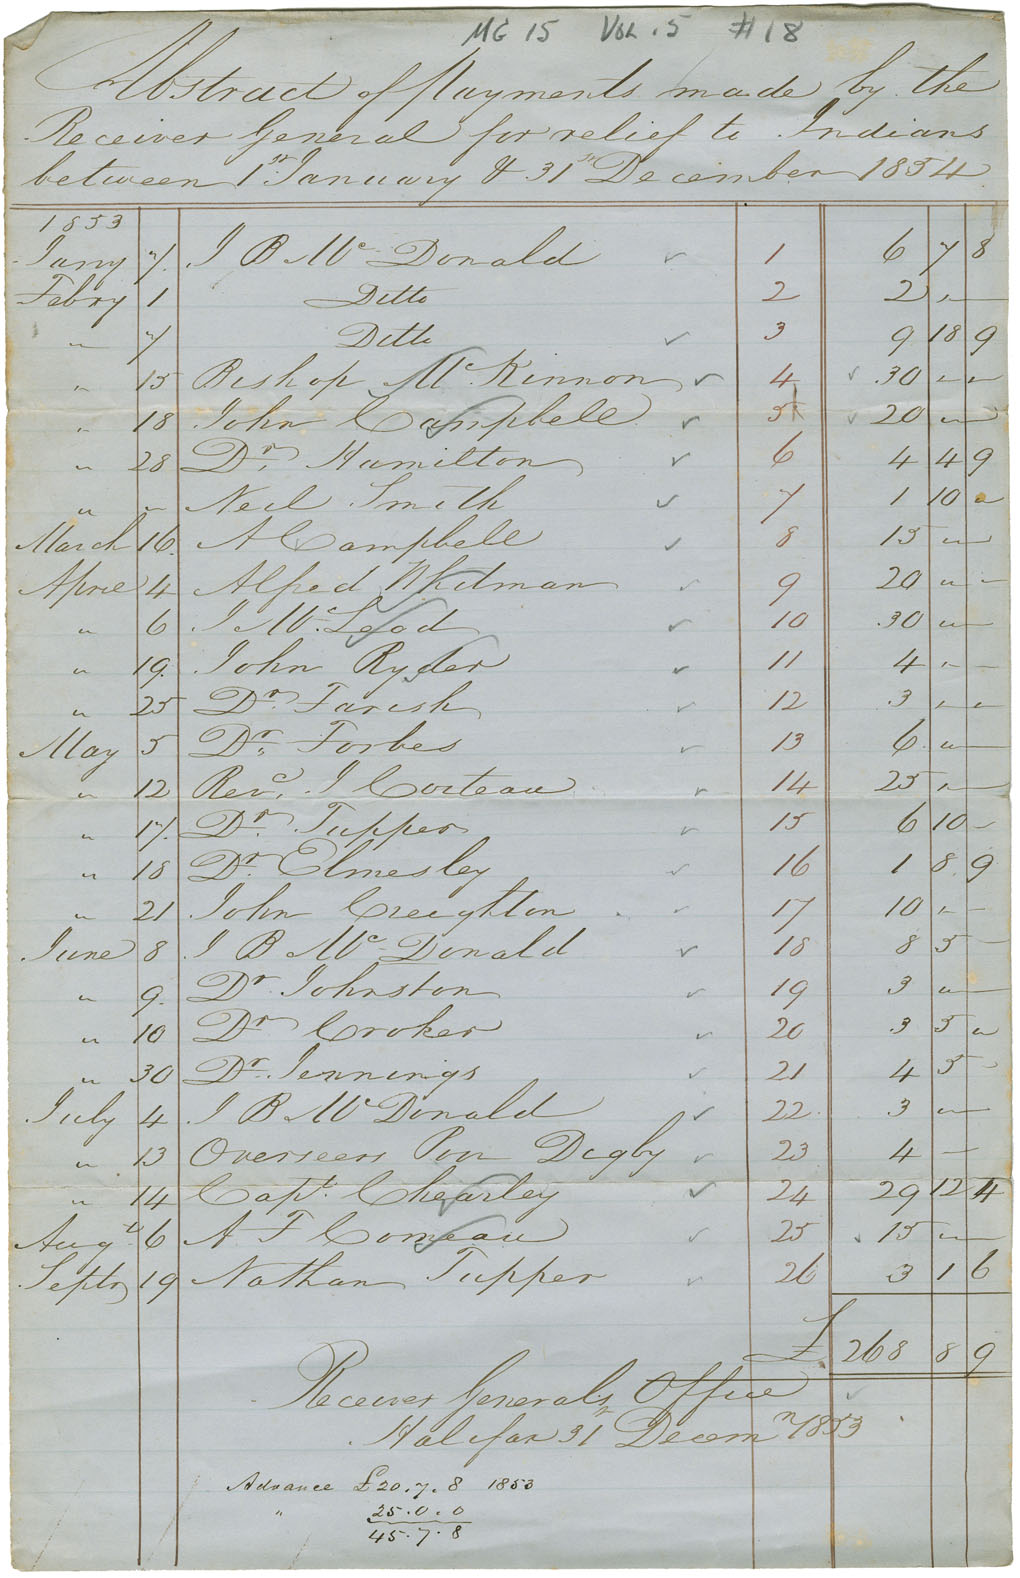 Abstract of payments made by the Receiver General for relief to Mi'kmaq for 1854.